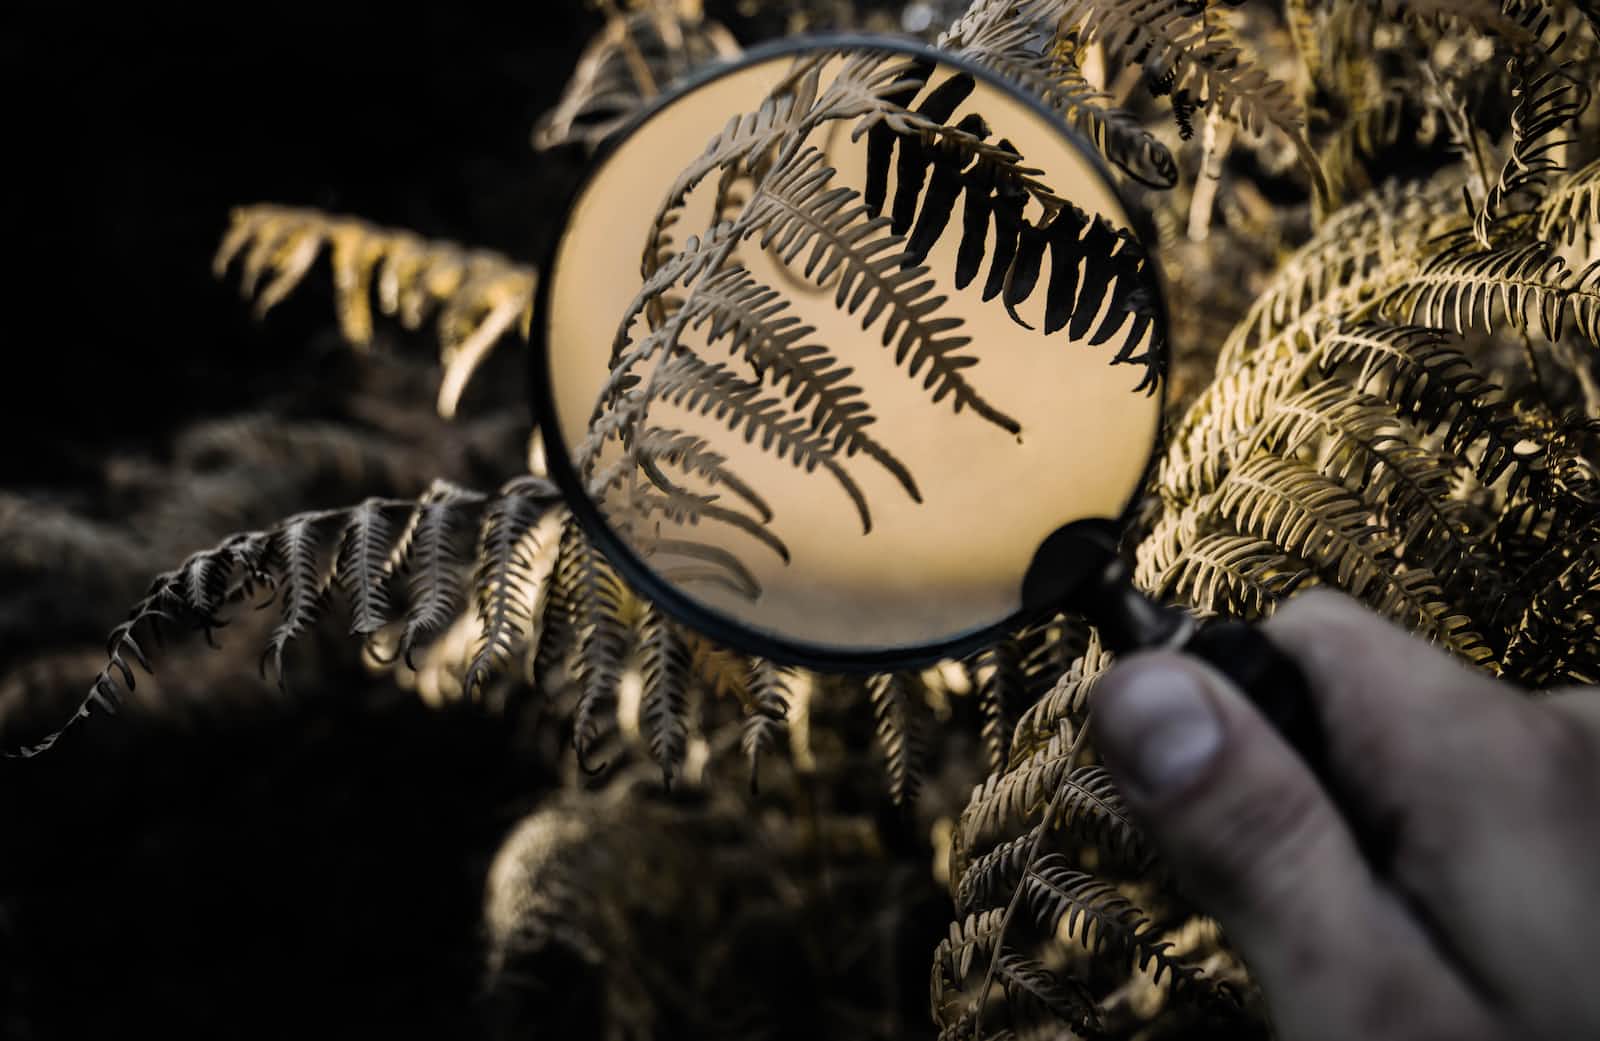 A magnifying glass to magnify the view of a leaf a fern